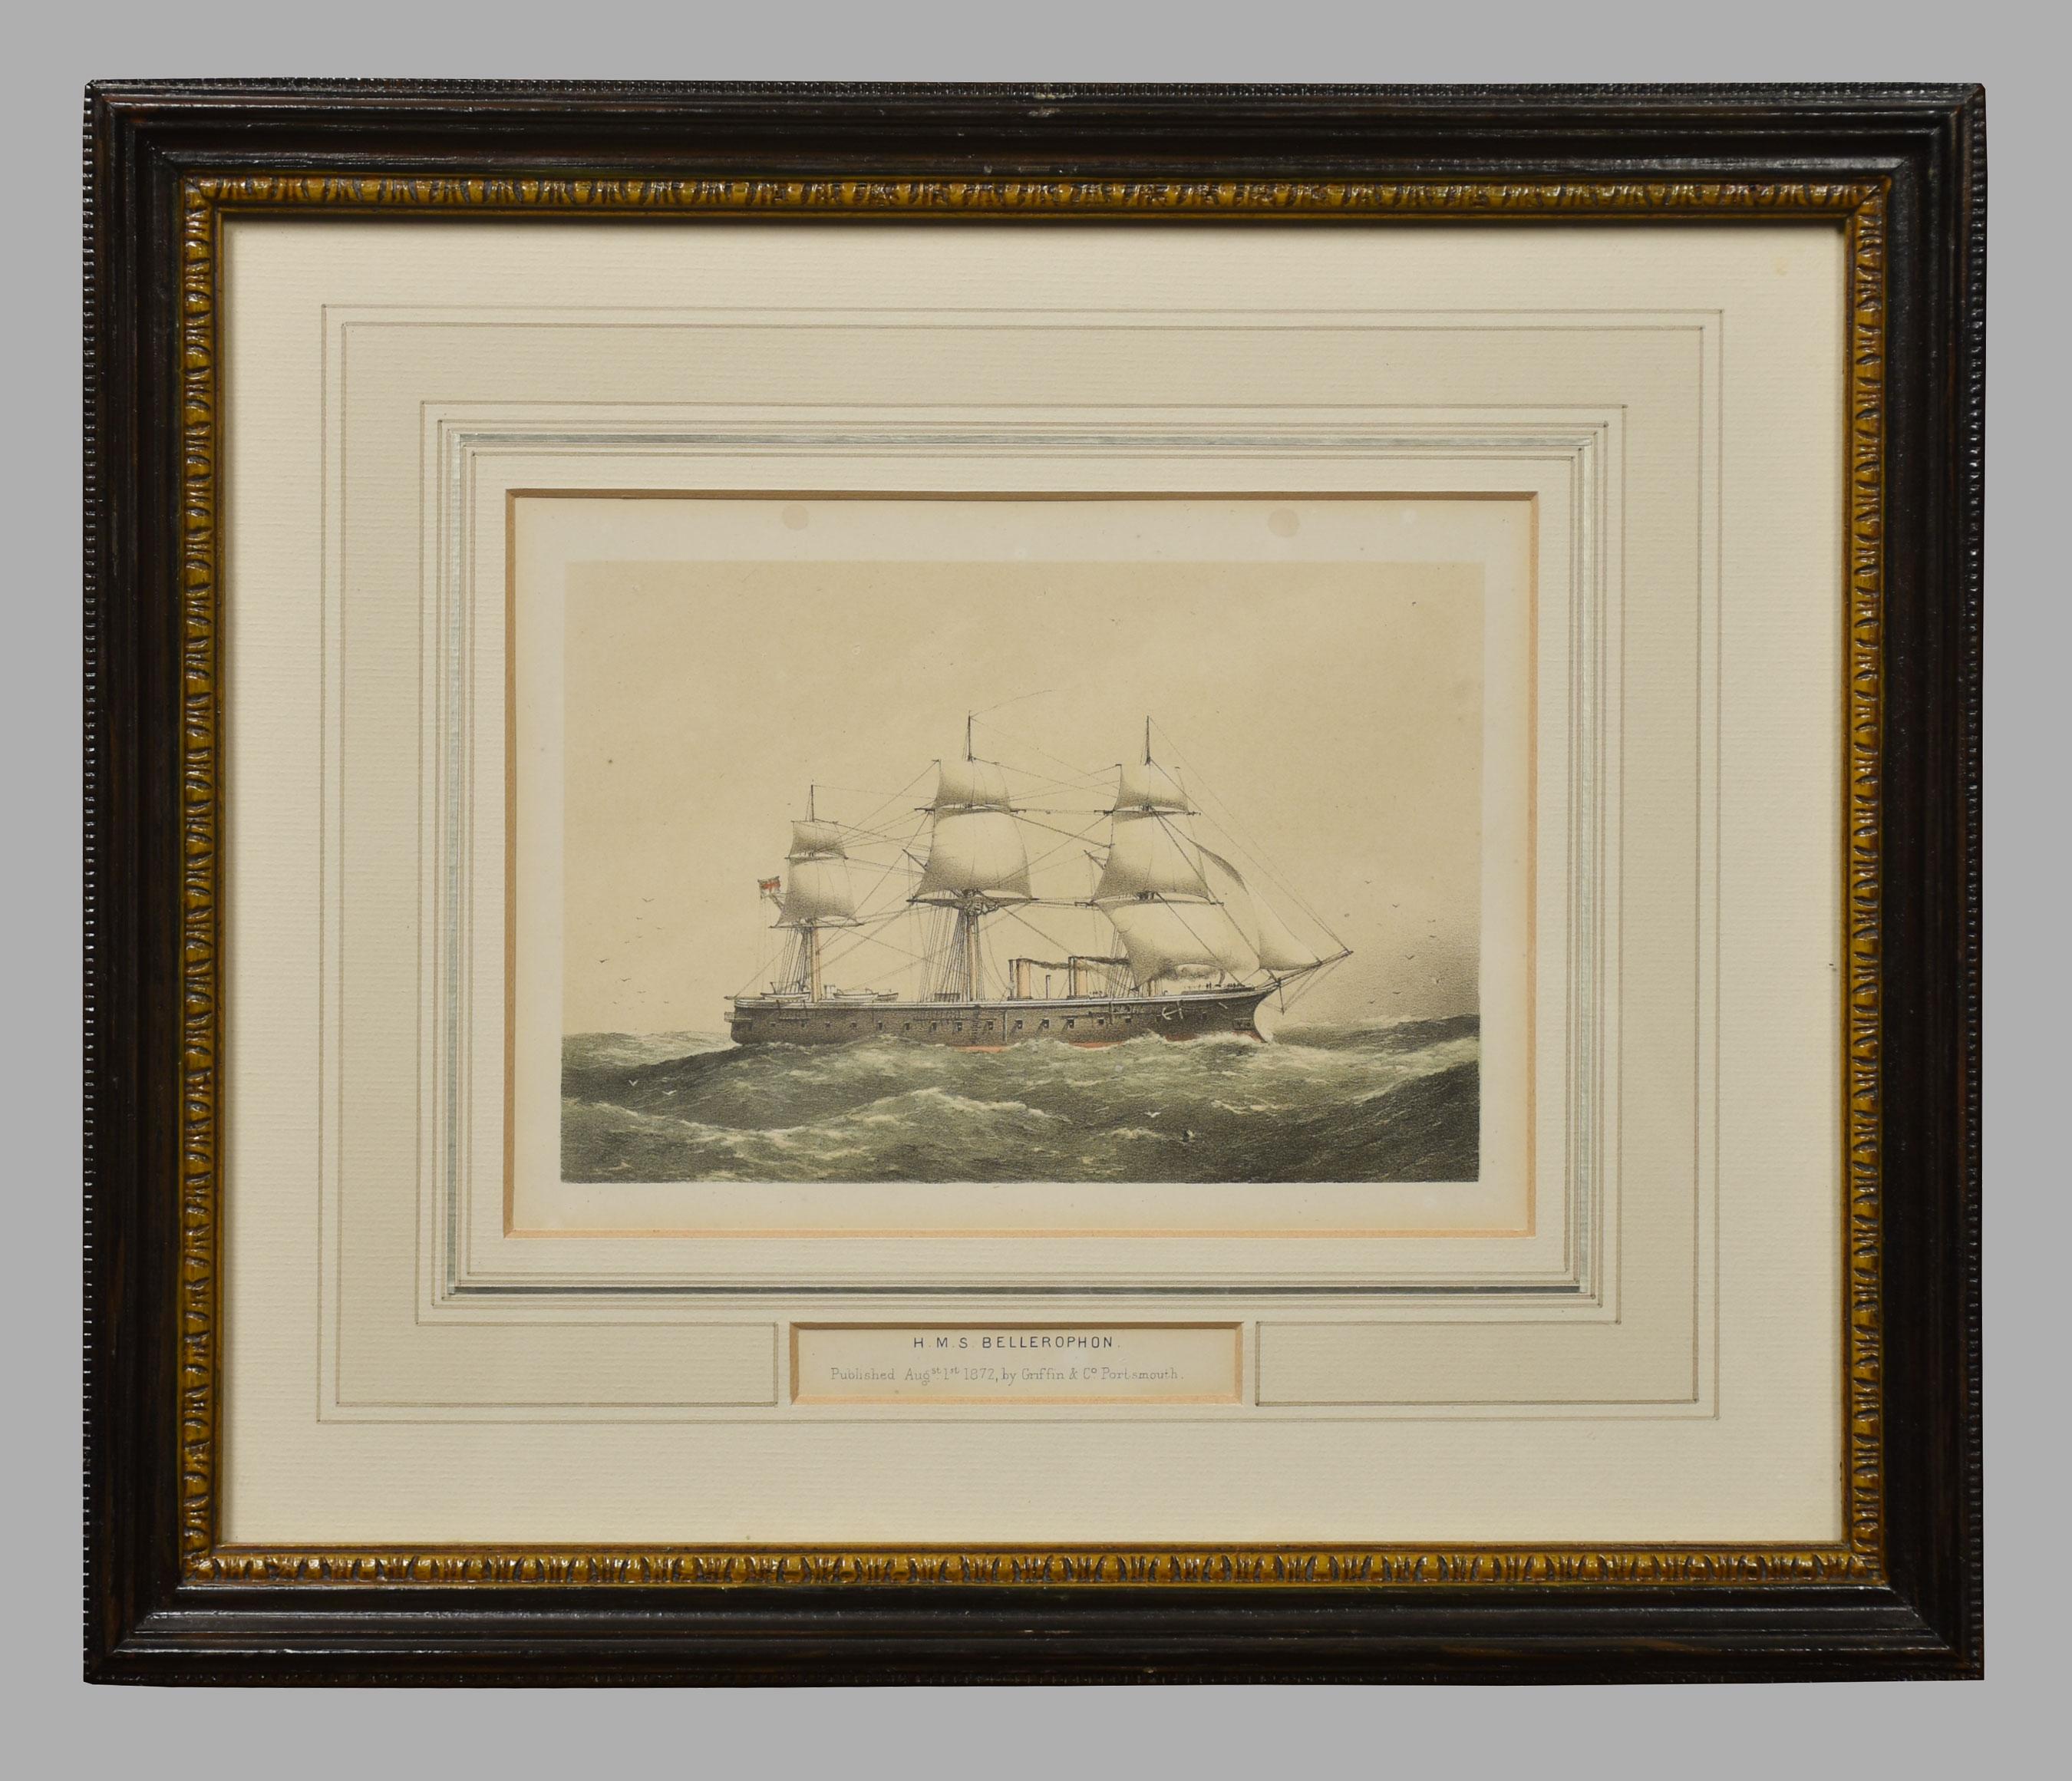 Set of four Ship lithographs, depicting the ships, Narcissus, Bellerophon, Monarch and Warrior, published by Griffin and Co. Encased in ebonised frames.
Dimensions
Height 12.5 inches
Width 14.5 inches
Depth 1 inches.